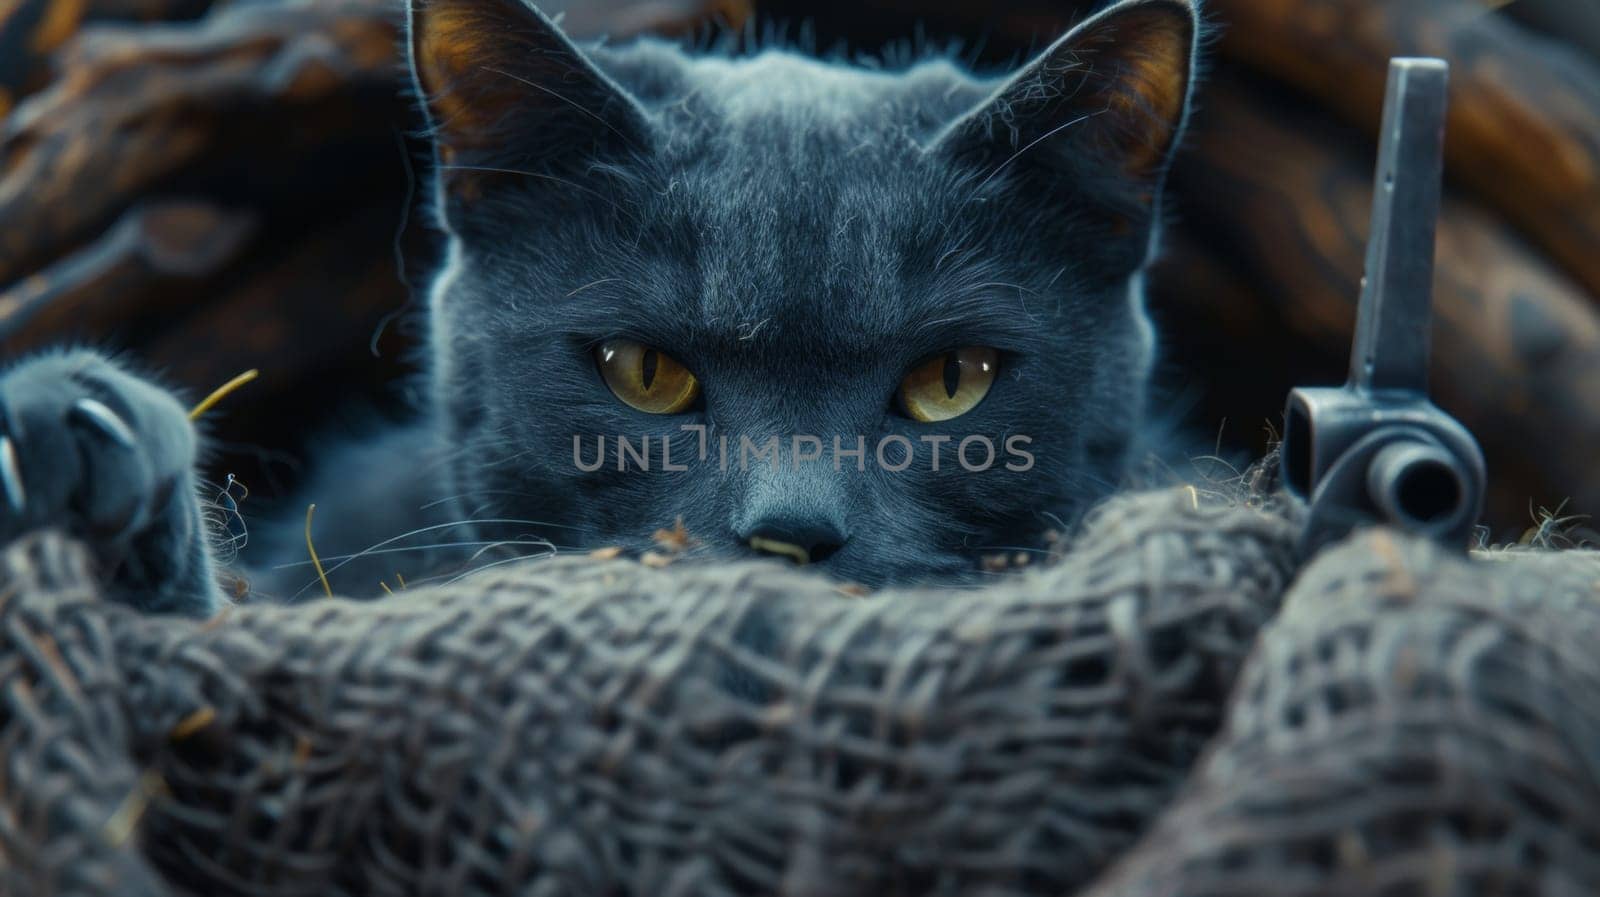 A black cat with yellow eyes peeking out from behind a piece of rope